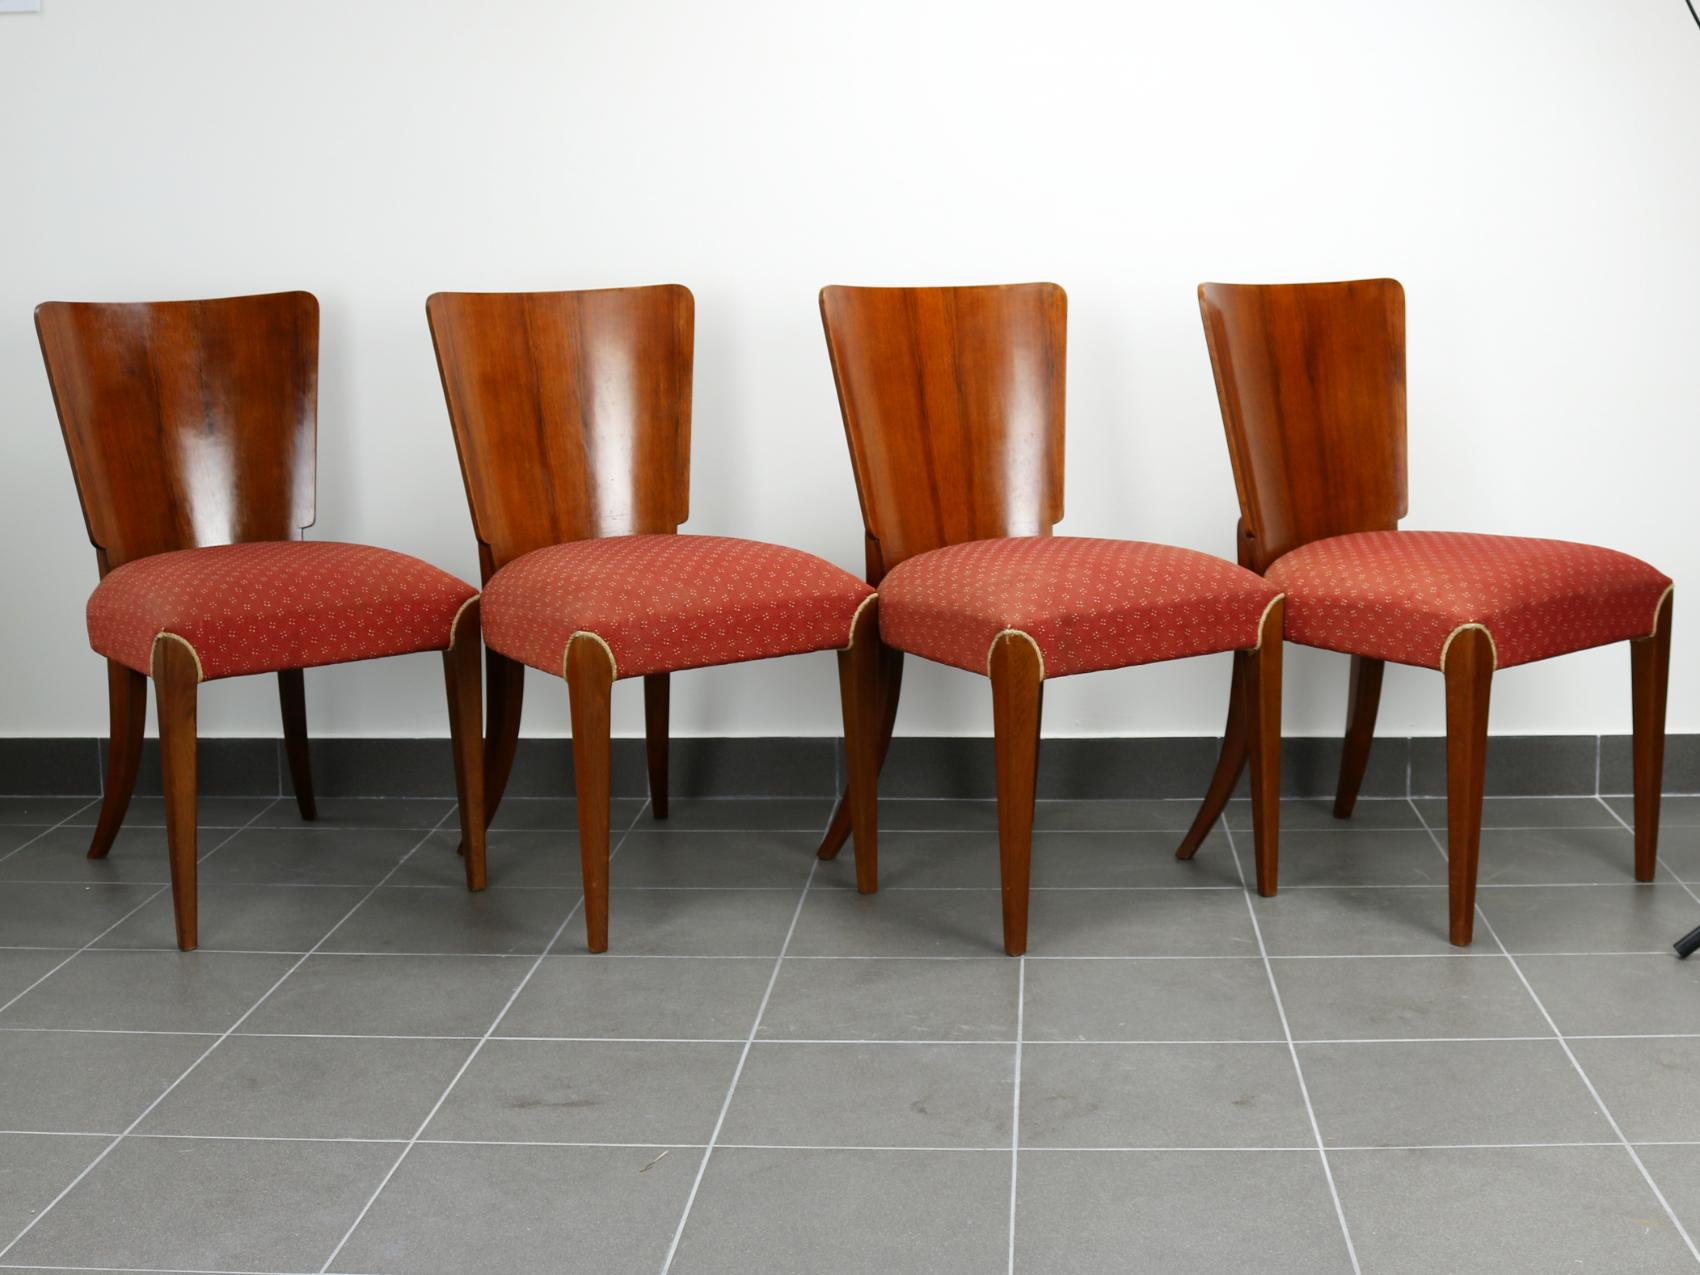 Art Deco dining chairs H214 were designed by Jindrich Halabala and manufactured in Czechoslovakia, having a beech wood frame, walnut veneer backrests, spring seats and original upholstery.